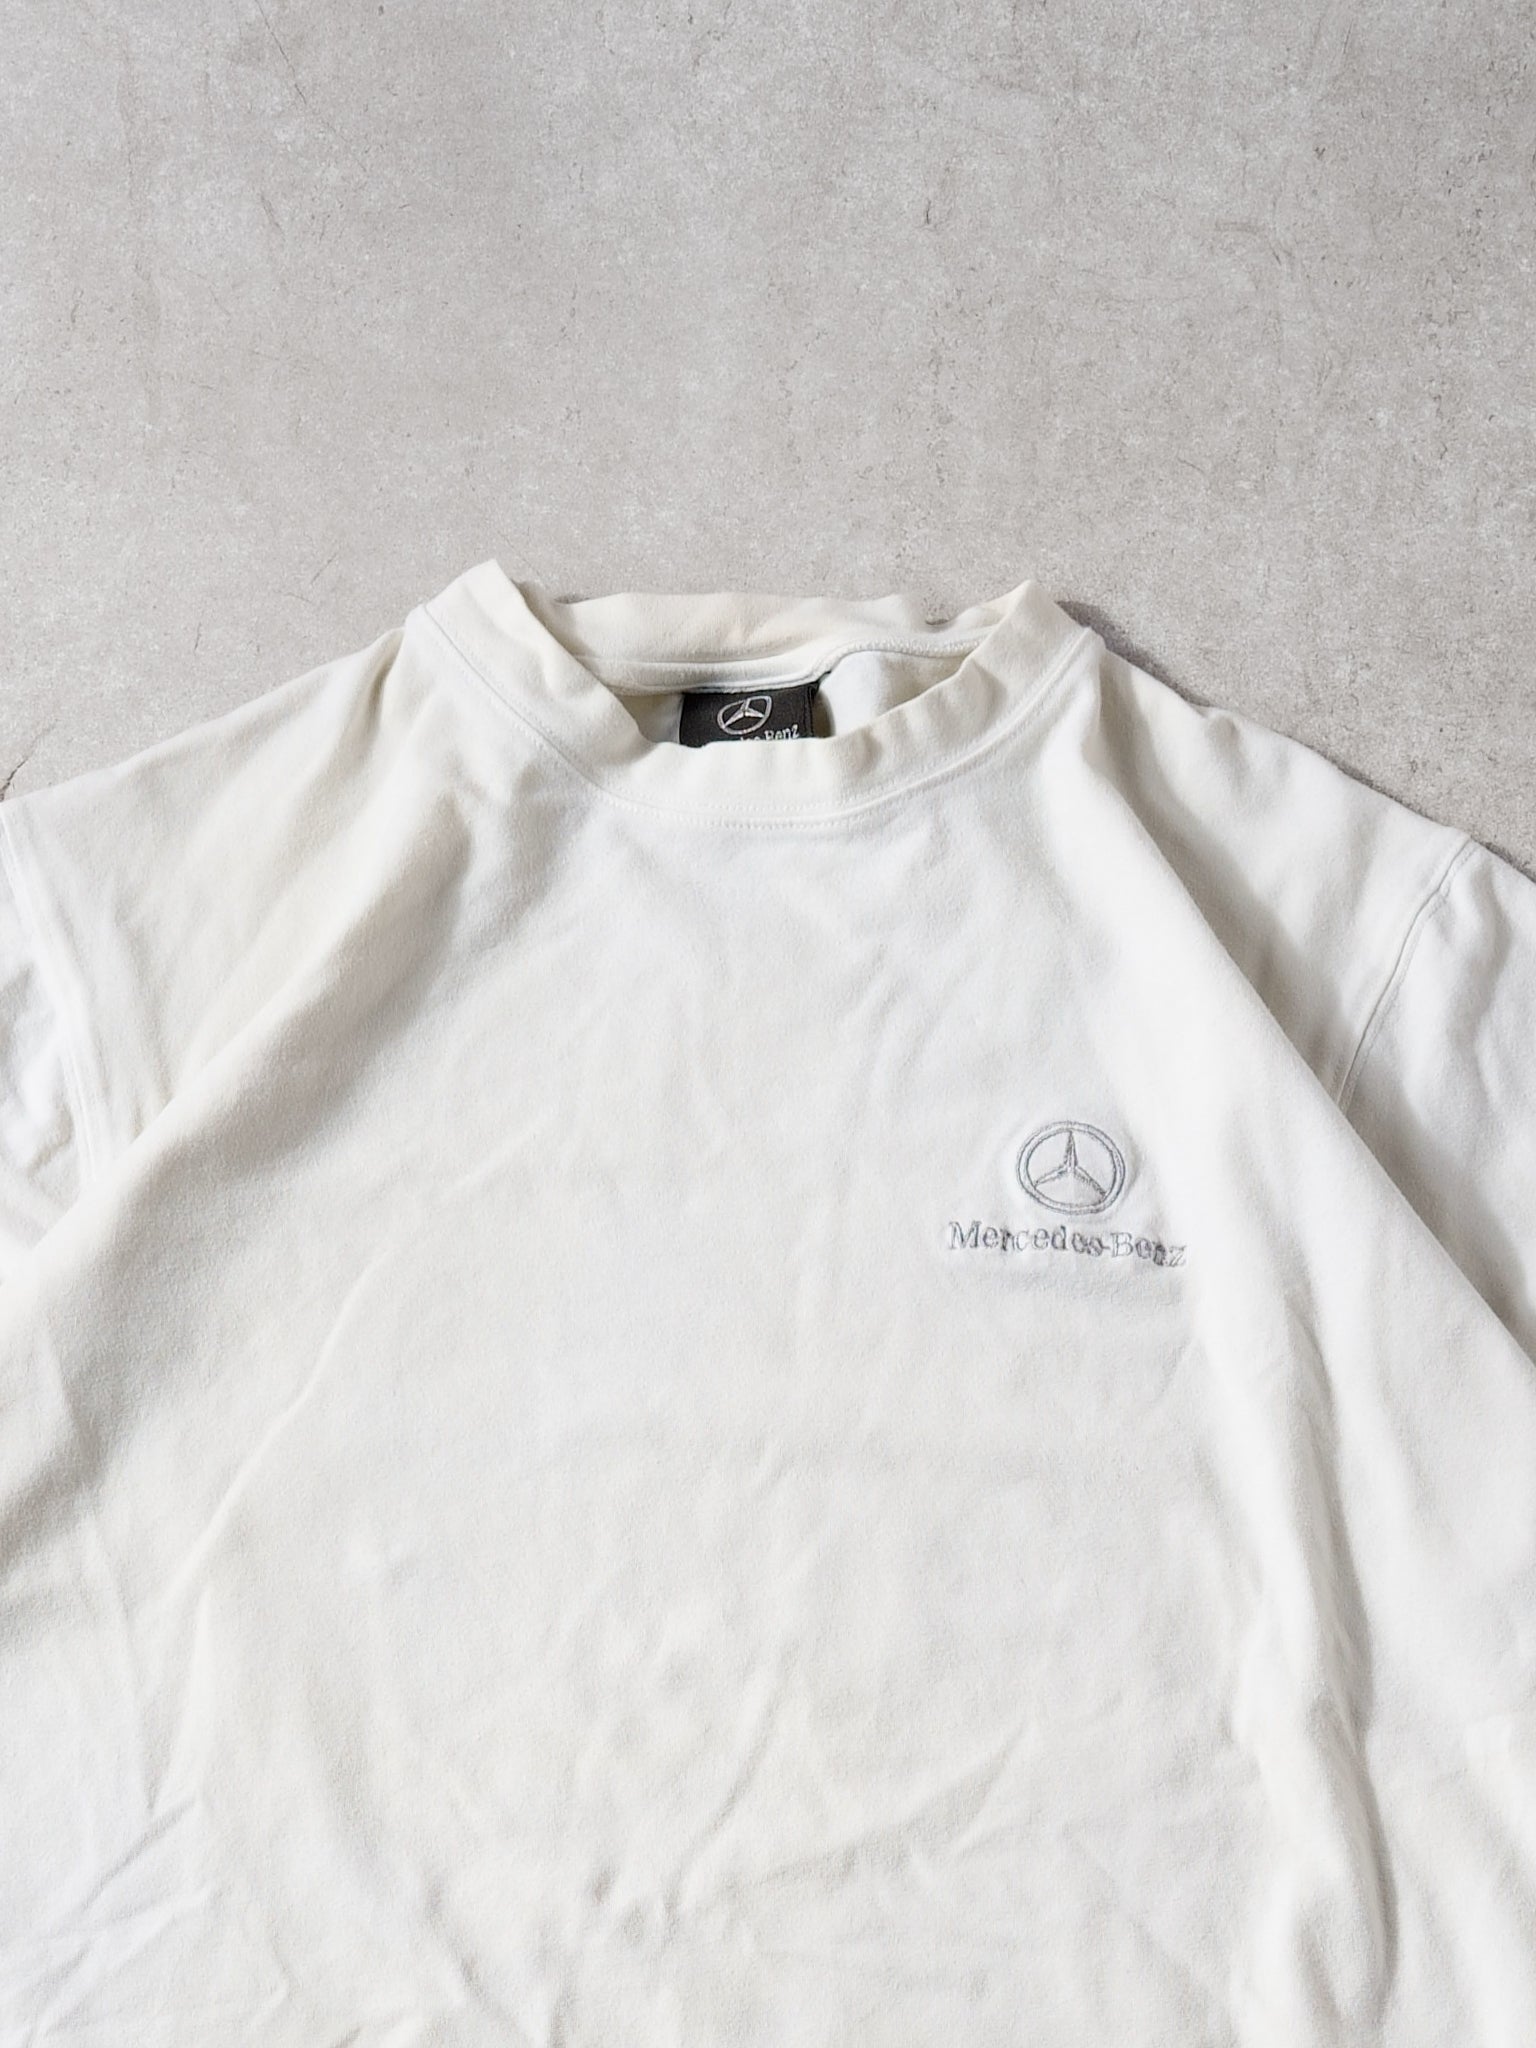 Vintage 90s White Mercedes Benz Embroidery Tee (M/L)